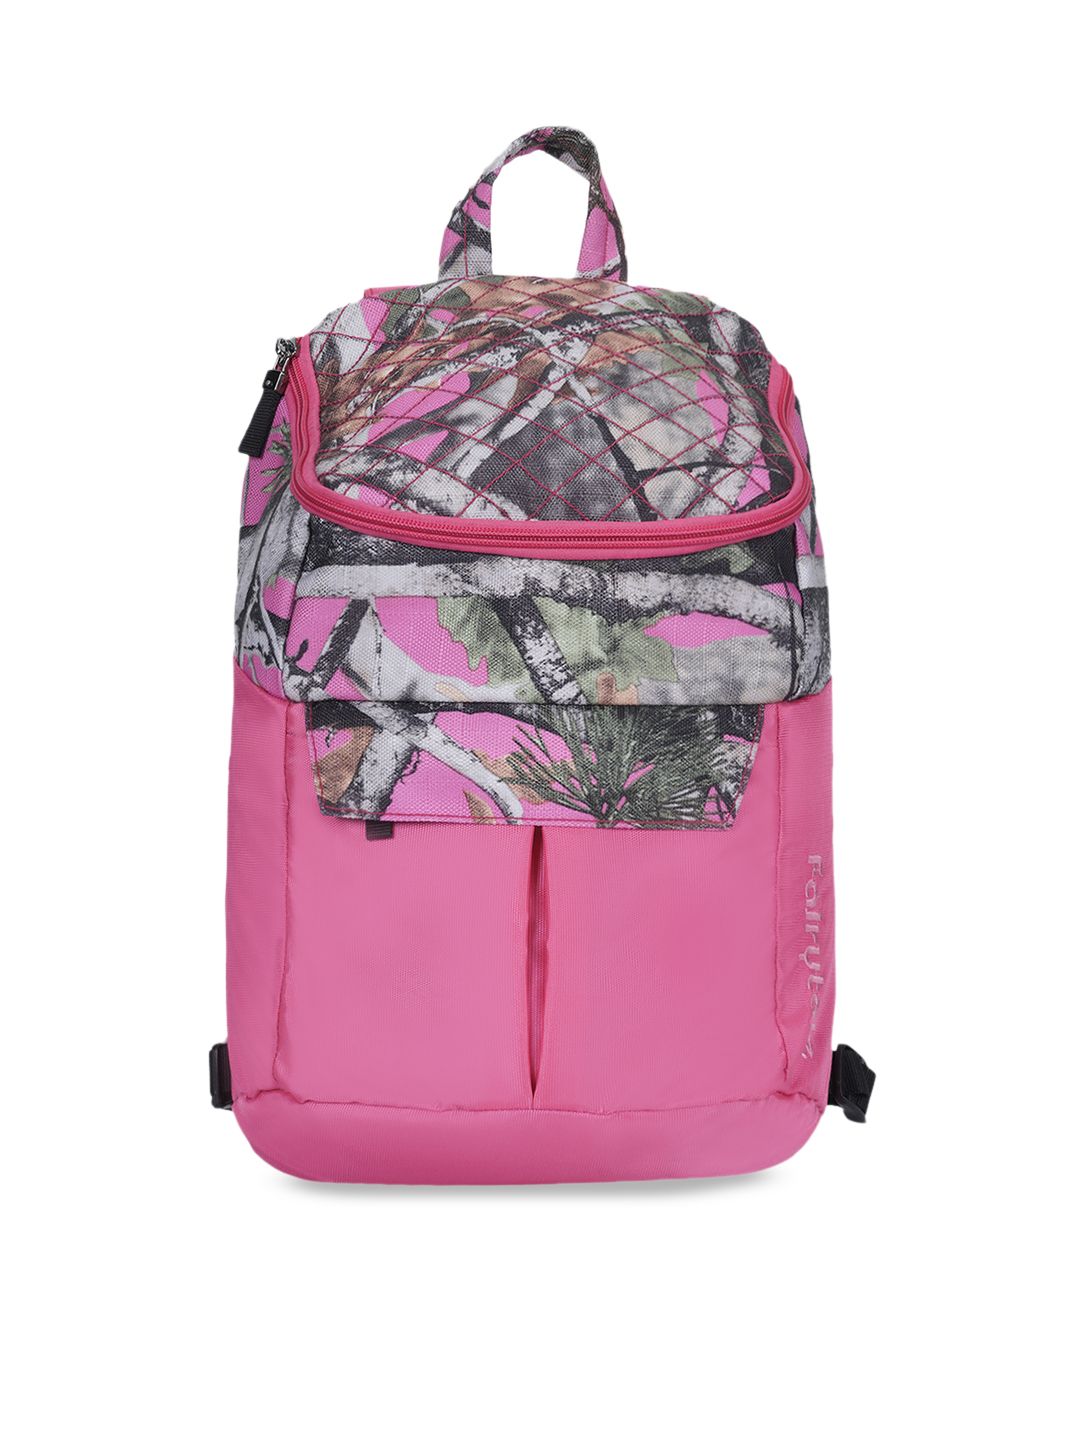 Impulse Women Pink Graphic Backpack Price in India